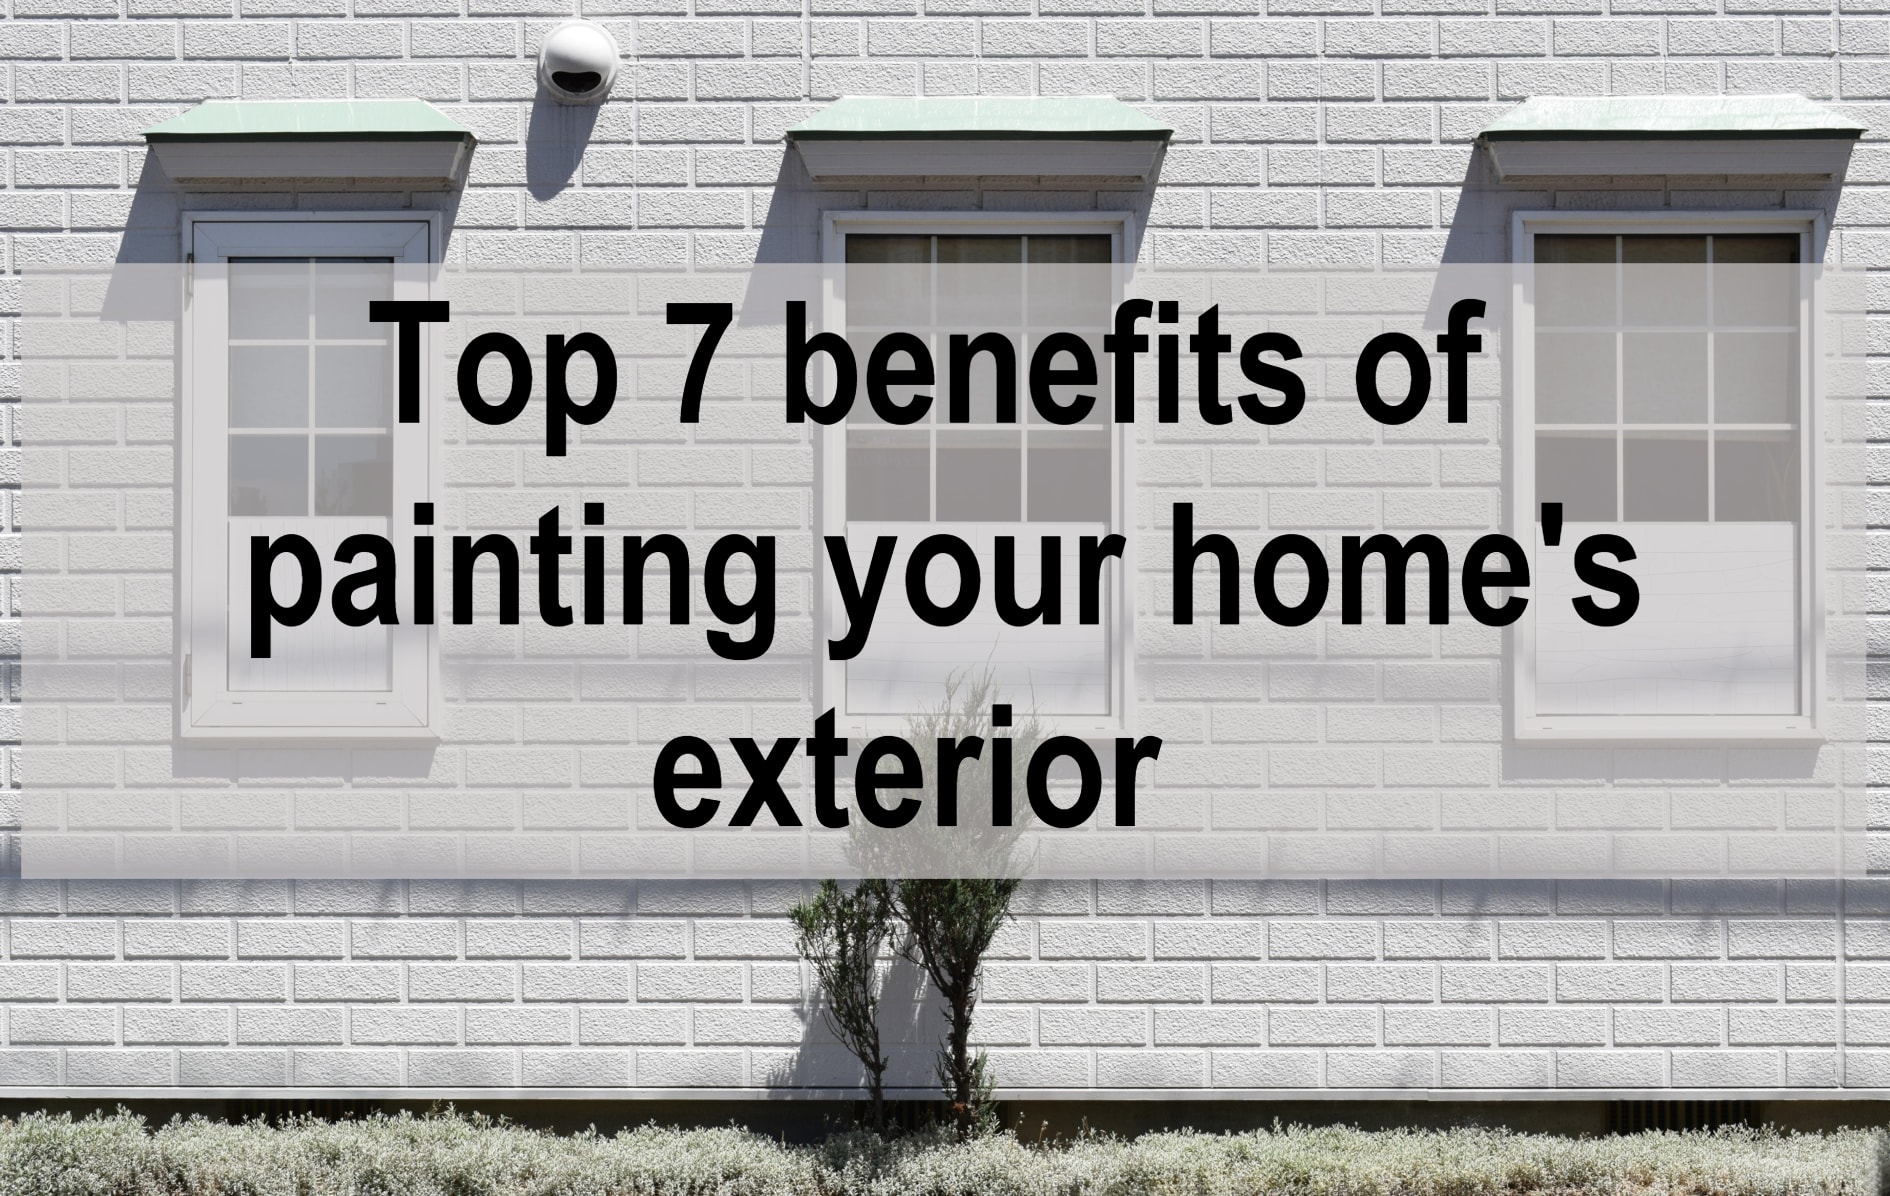 Benefits of exterior painting